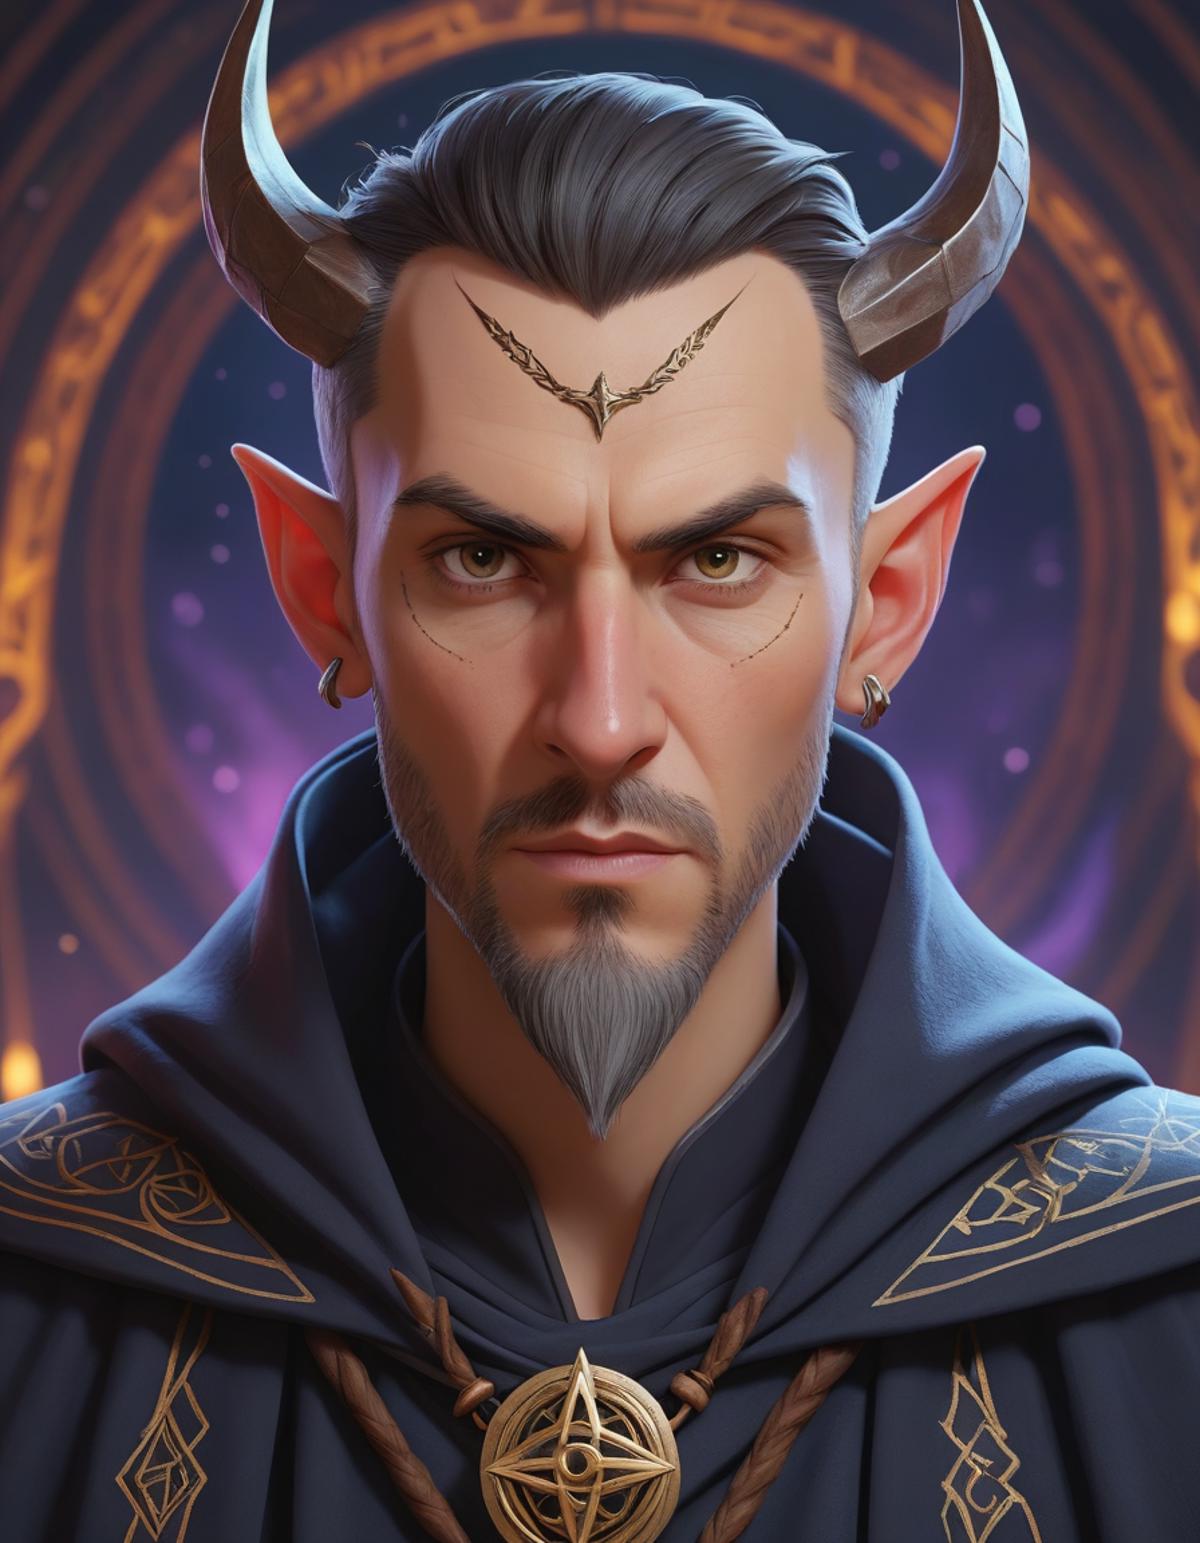 A fantasy portrait of a man with pointy ears and wizard robes. Magical symbols and runes adorn his background.